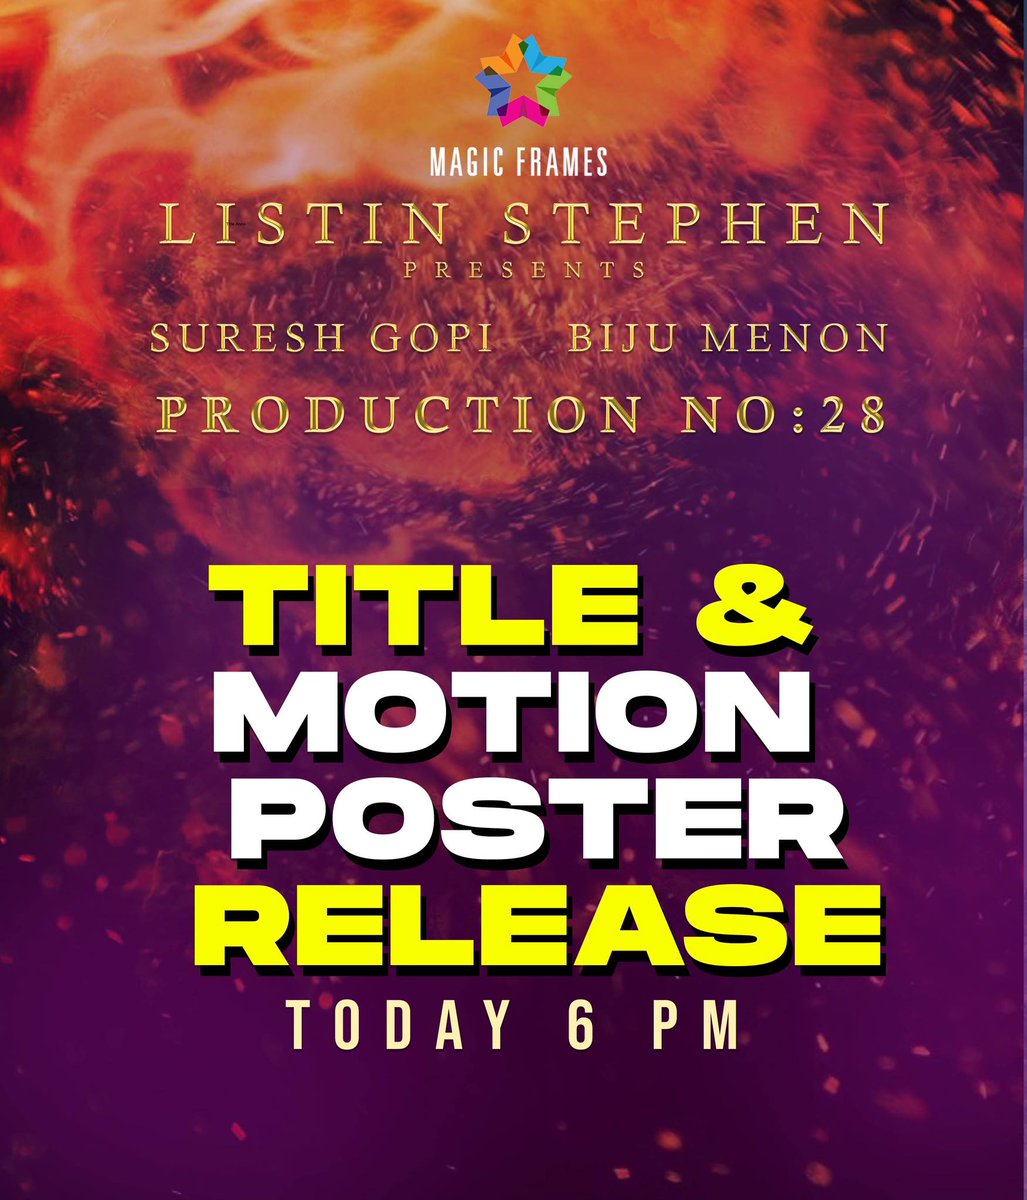 Stay Tuned ✨♥️

Title & Motion Poster Release Today @ 6 PM 🤗

#SureshGopi 
#BijuMenon 
#TitleReveal 
#MotionPoster 
#MagicFrames 
#ListinStephen 
#ProductionNo28